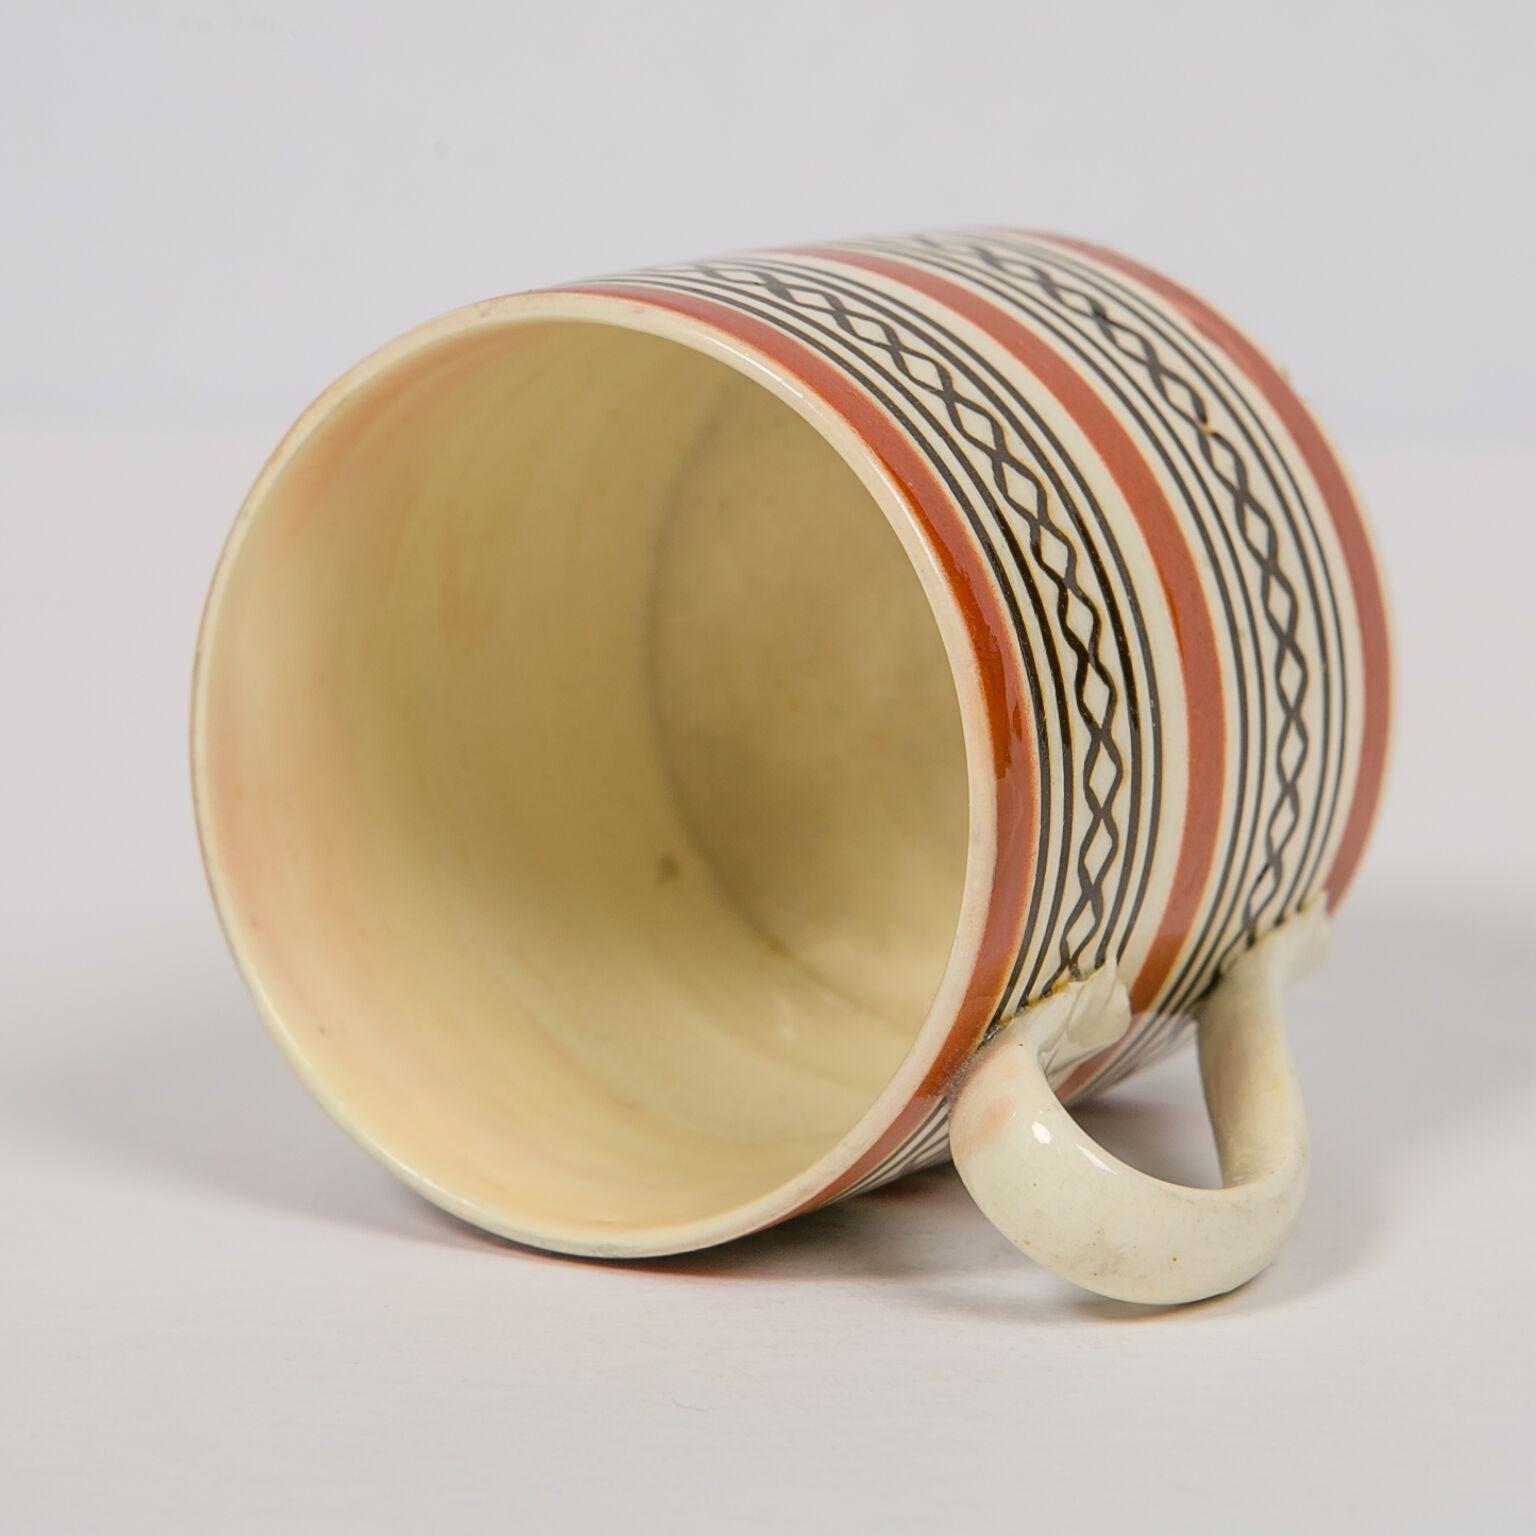 Small Mochaware mug made in England, circa 1820. Decorated with two bands of black engine-turned diamonds and bands of brown slip. The piece has a surprisingly modern look considering it was made 200 years ago. For more information on this type of